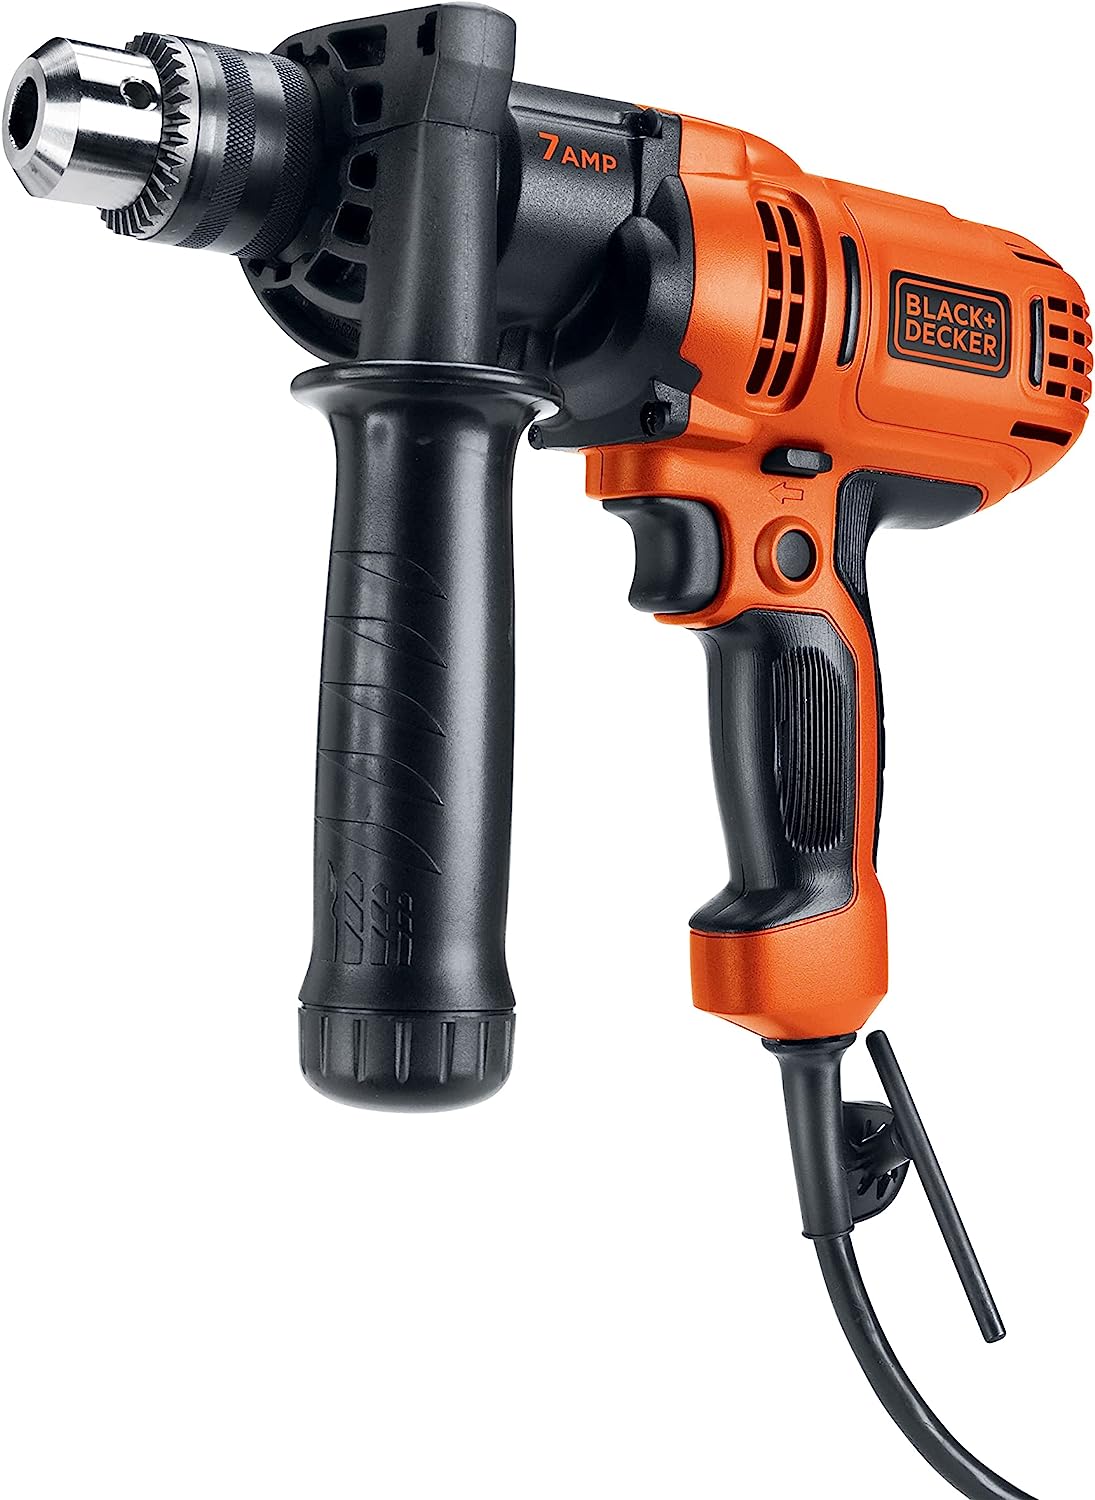 BLACK+DECKER 7.0 Amp 1/2 in. Electric Drill/Driver Kit [...]